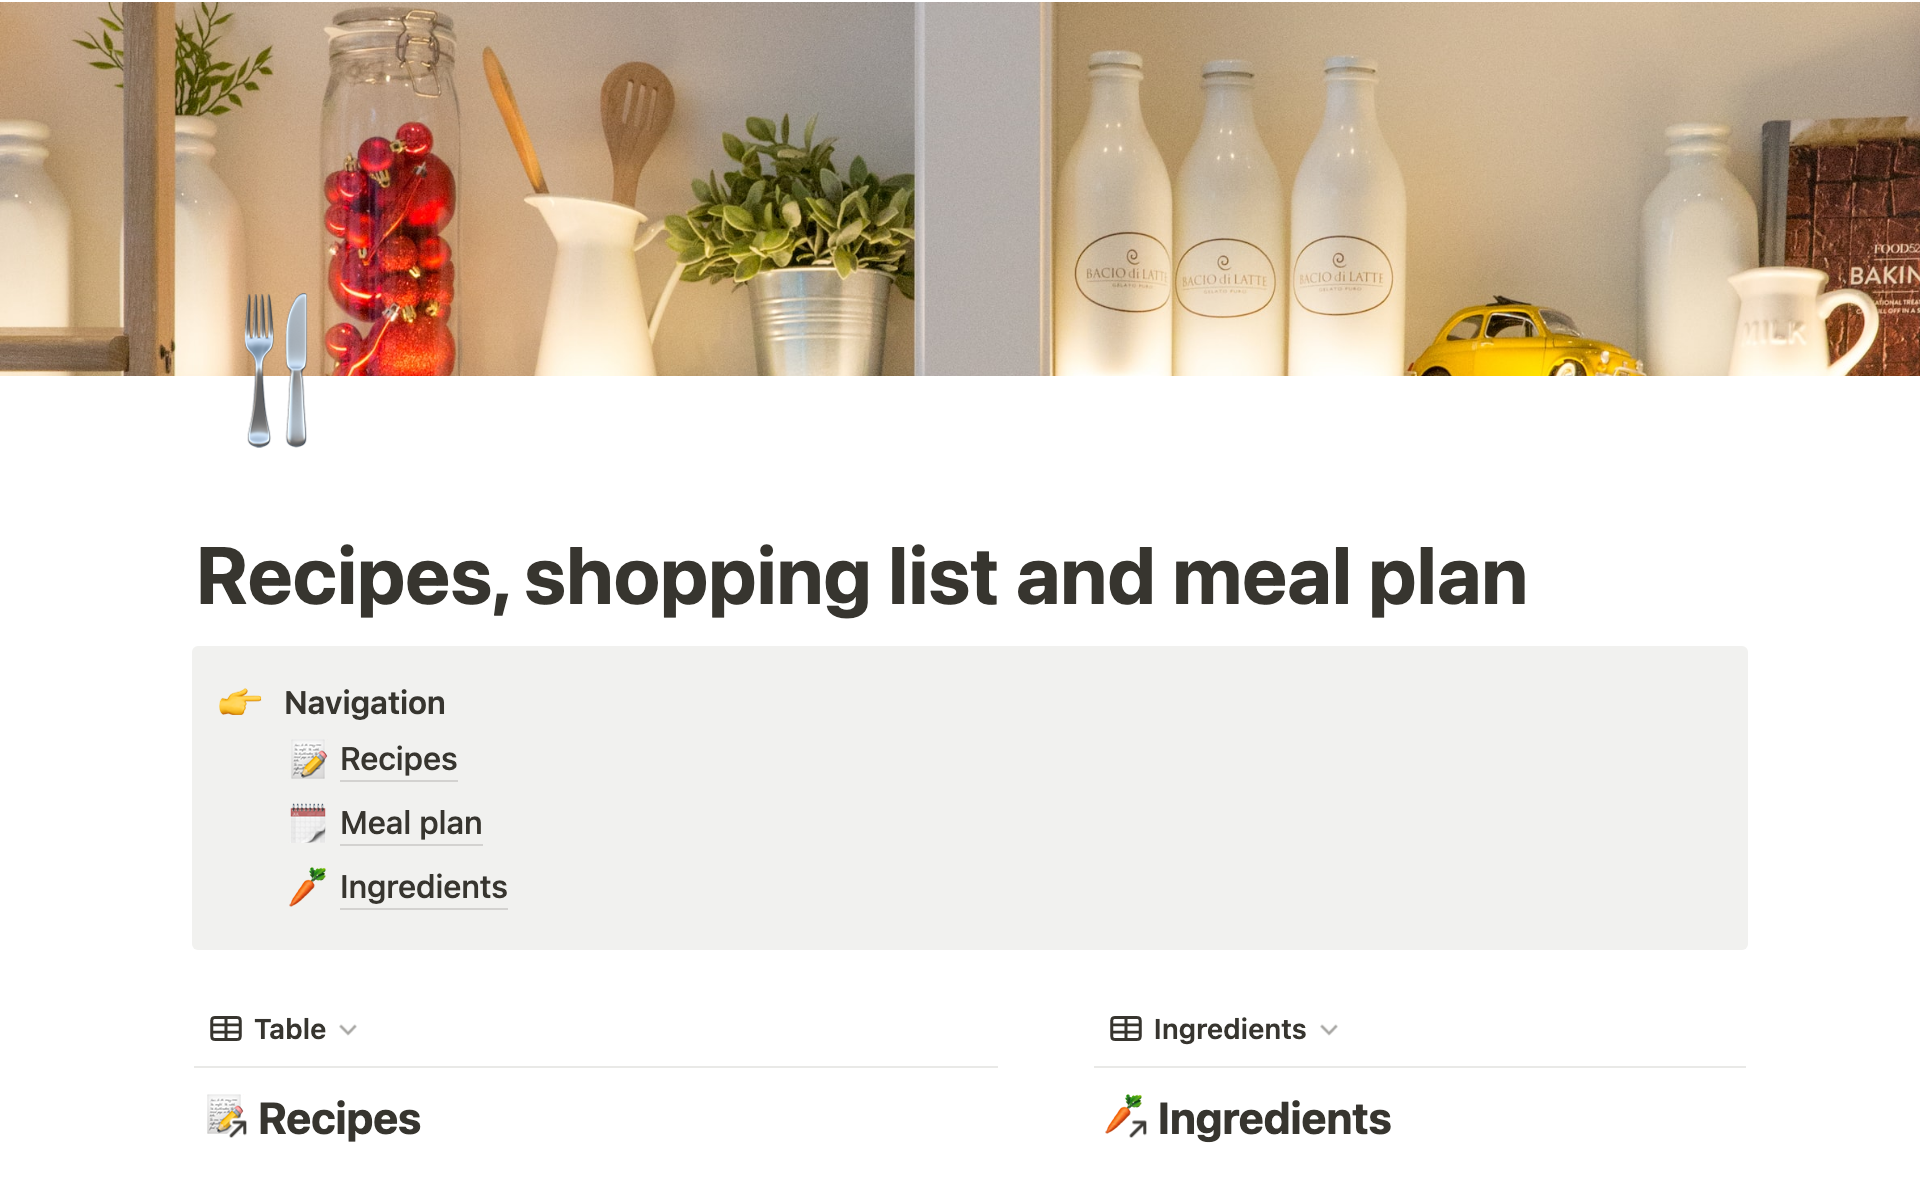 This is a comprehensive pantry management and meal planning system that seamlessly integrates your recipes and ingredient database for hassle-free meal planning and grocery shopping.